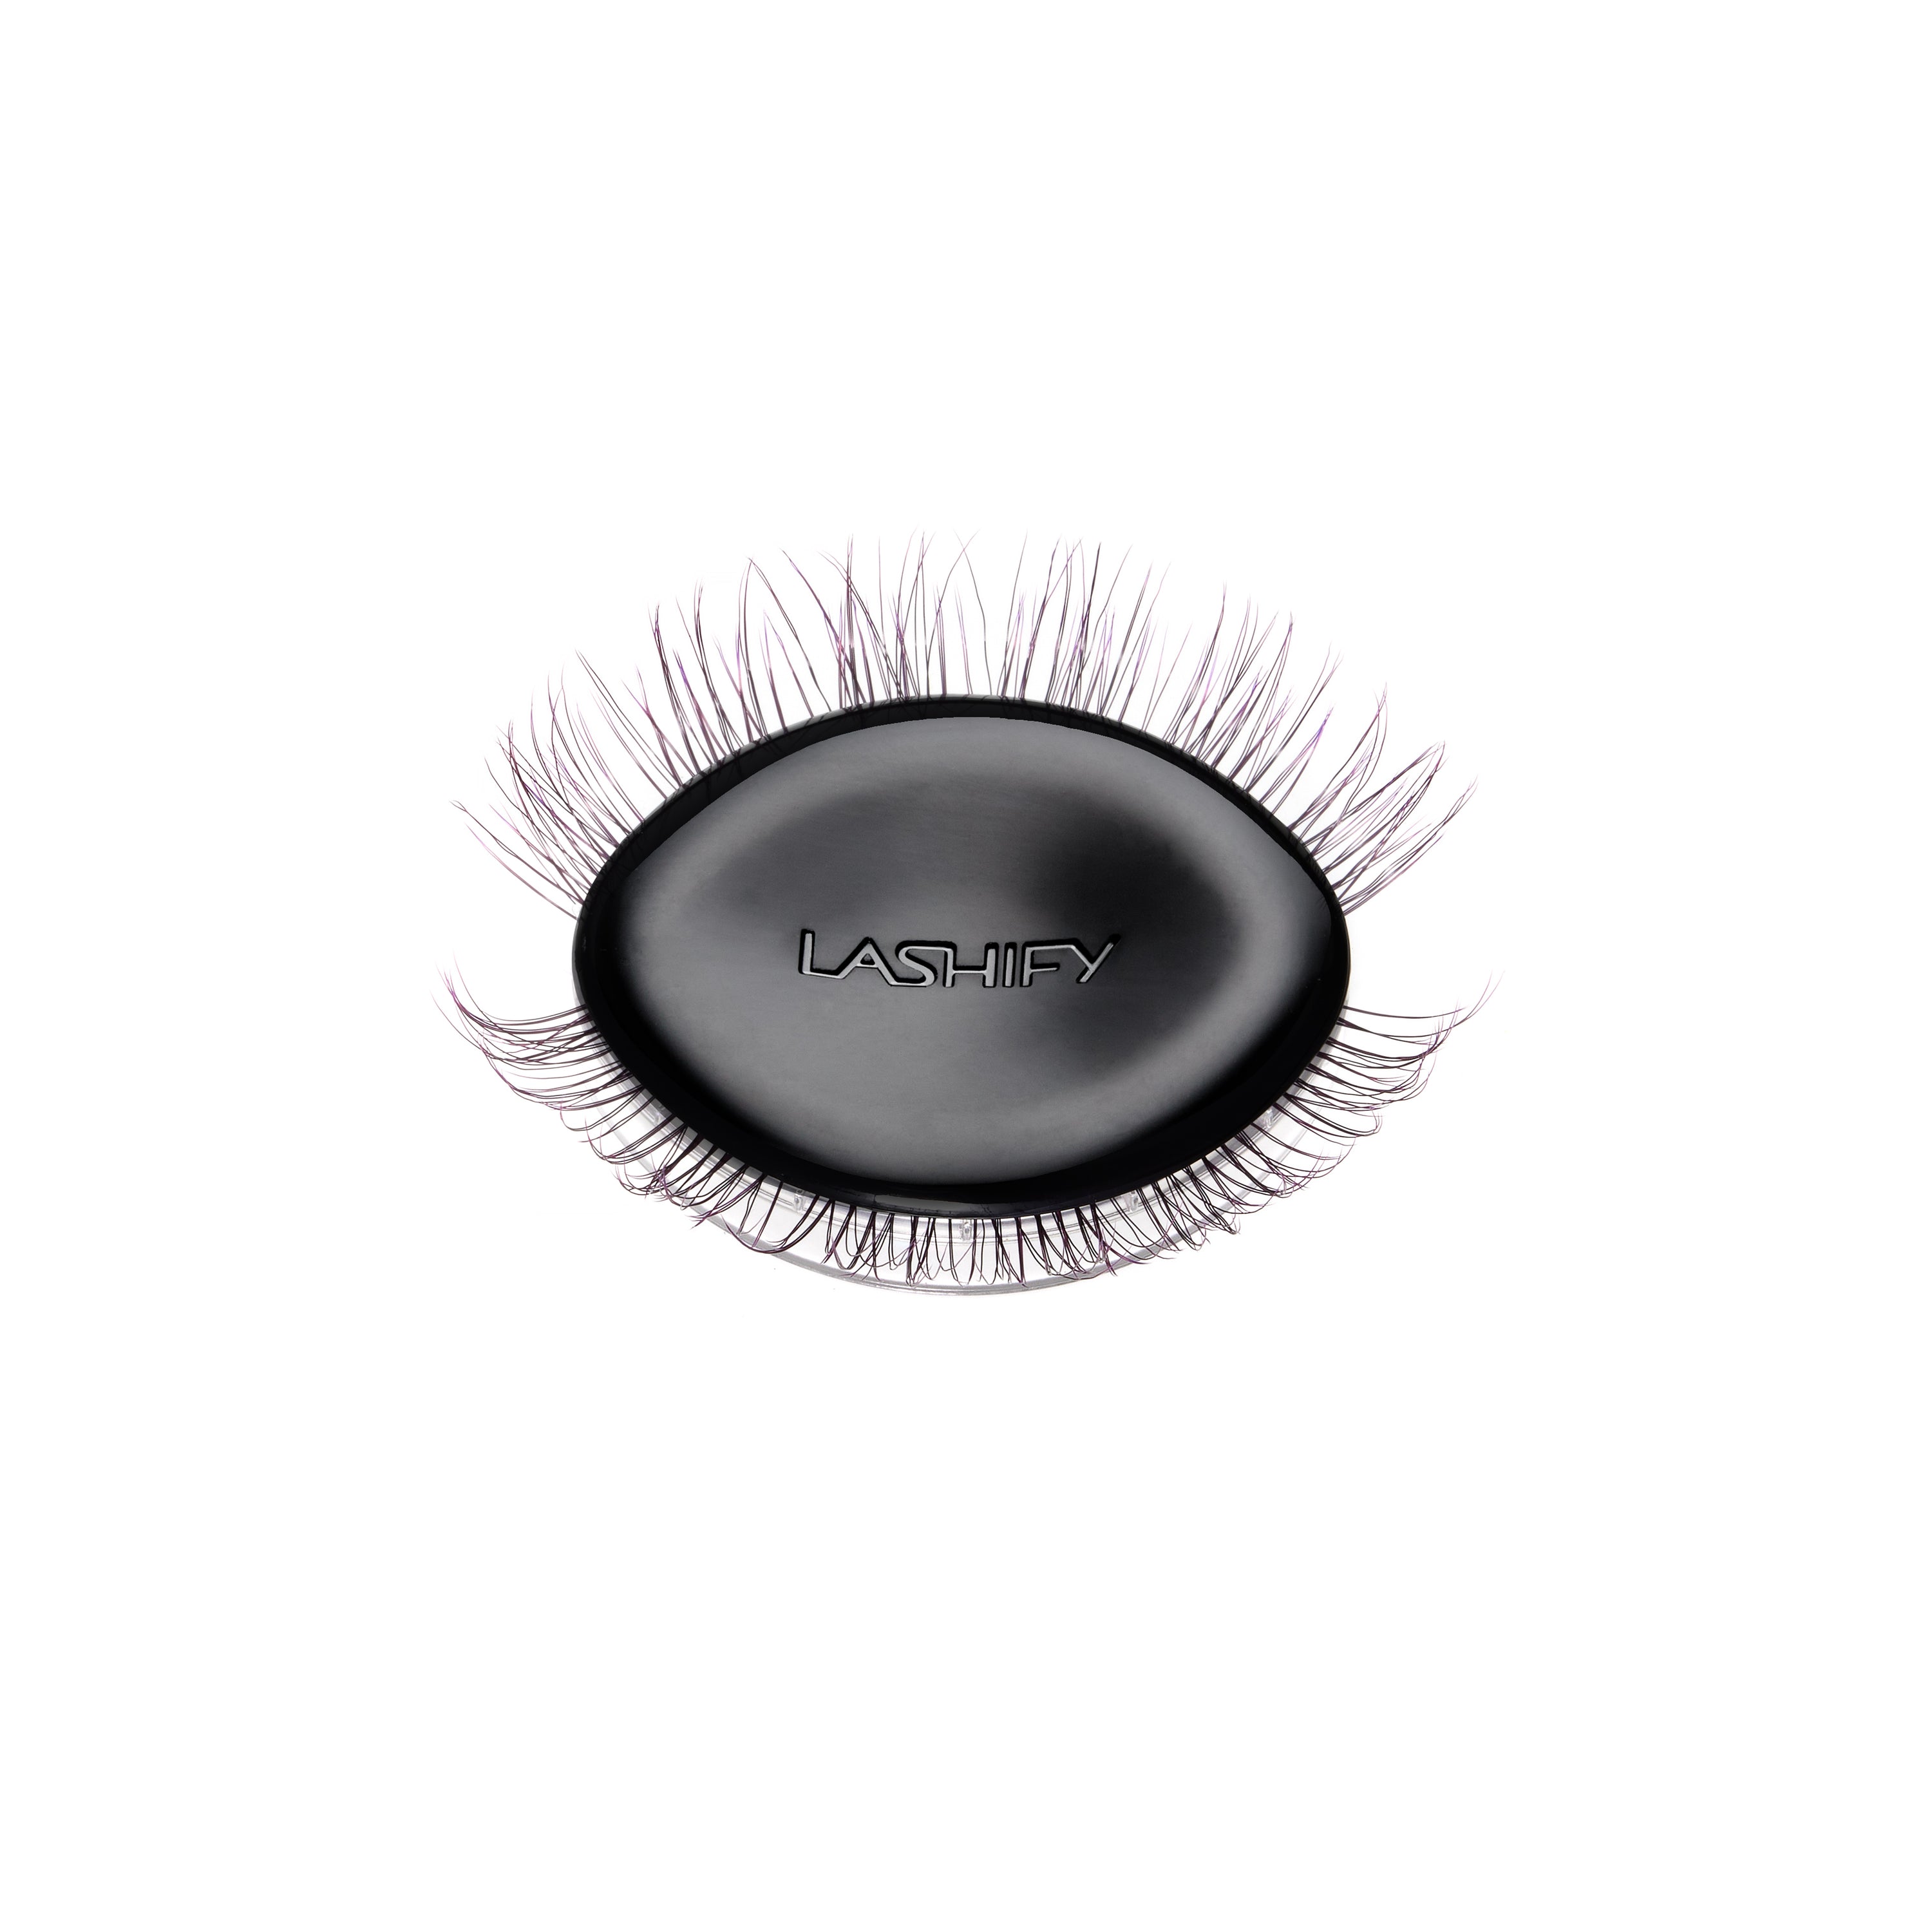 Ombre Gossamer® Lashes - Pro Pack (2 count)